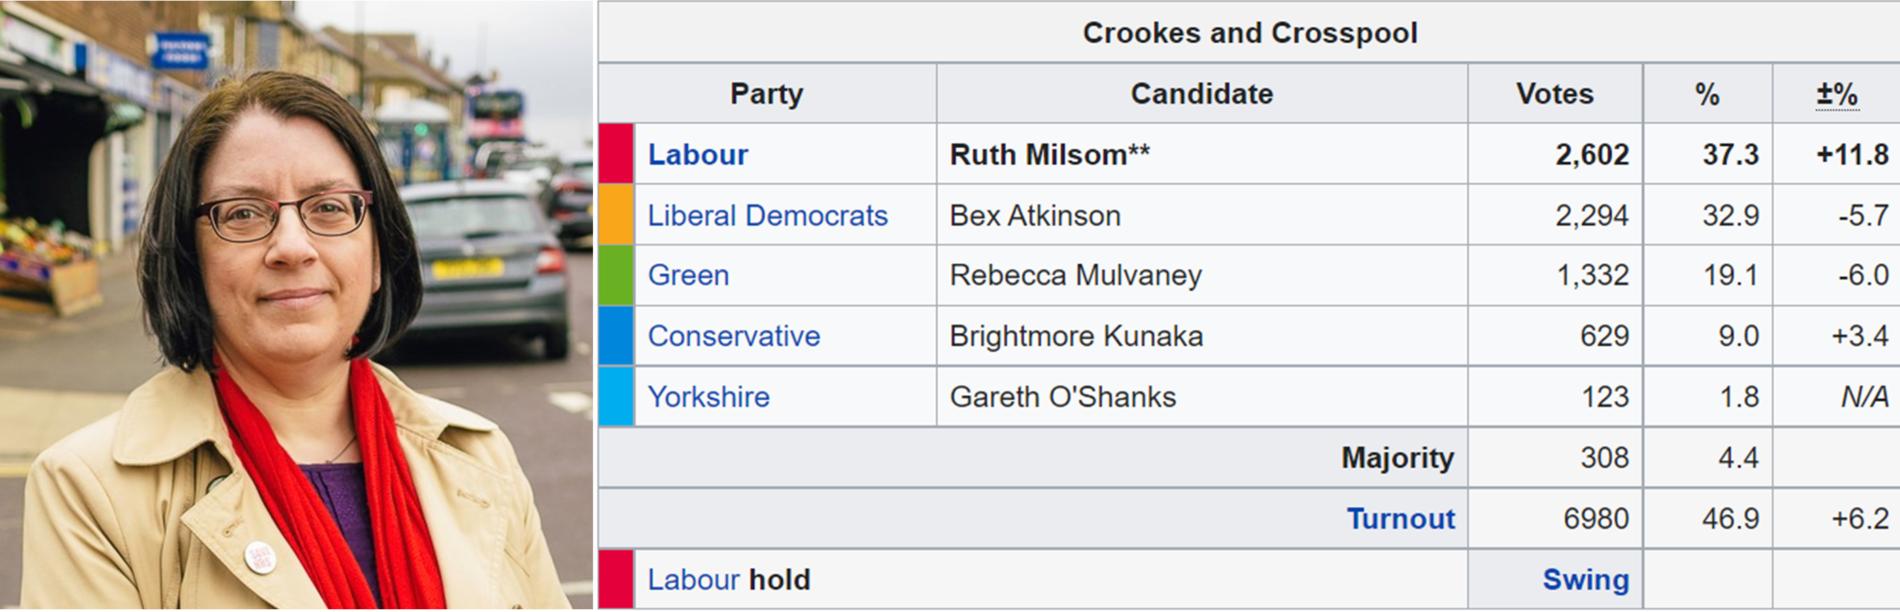 Ruth Milsom elected in Crookes and Crosspool ward